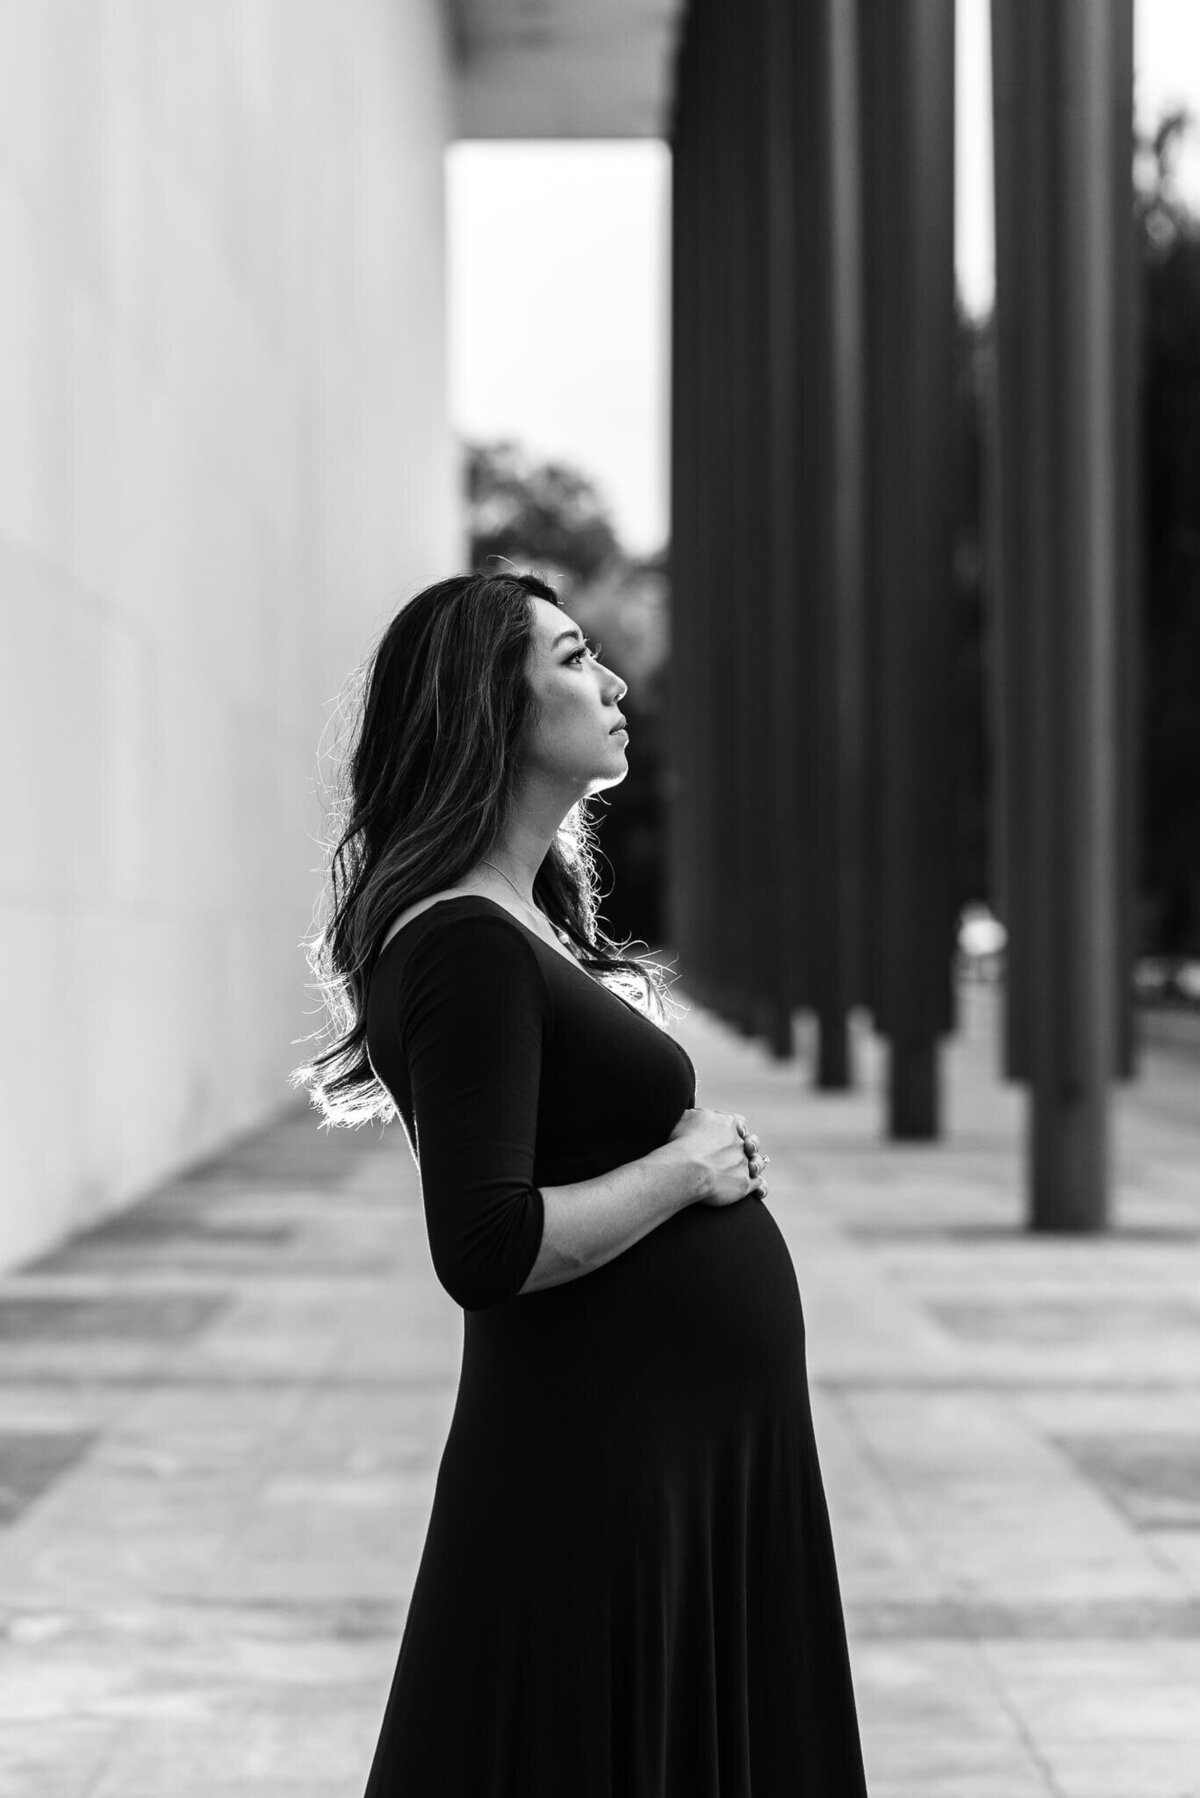 A B&W photo of a pregnant mother by Denise Van, a Northern Virginia maternity photographer